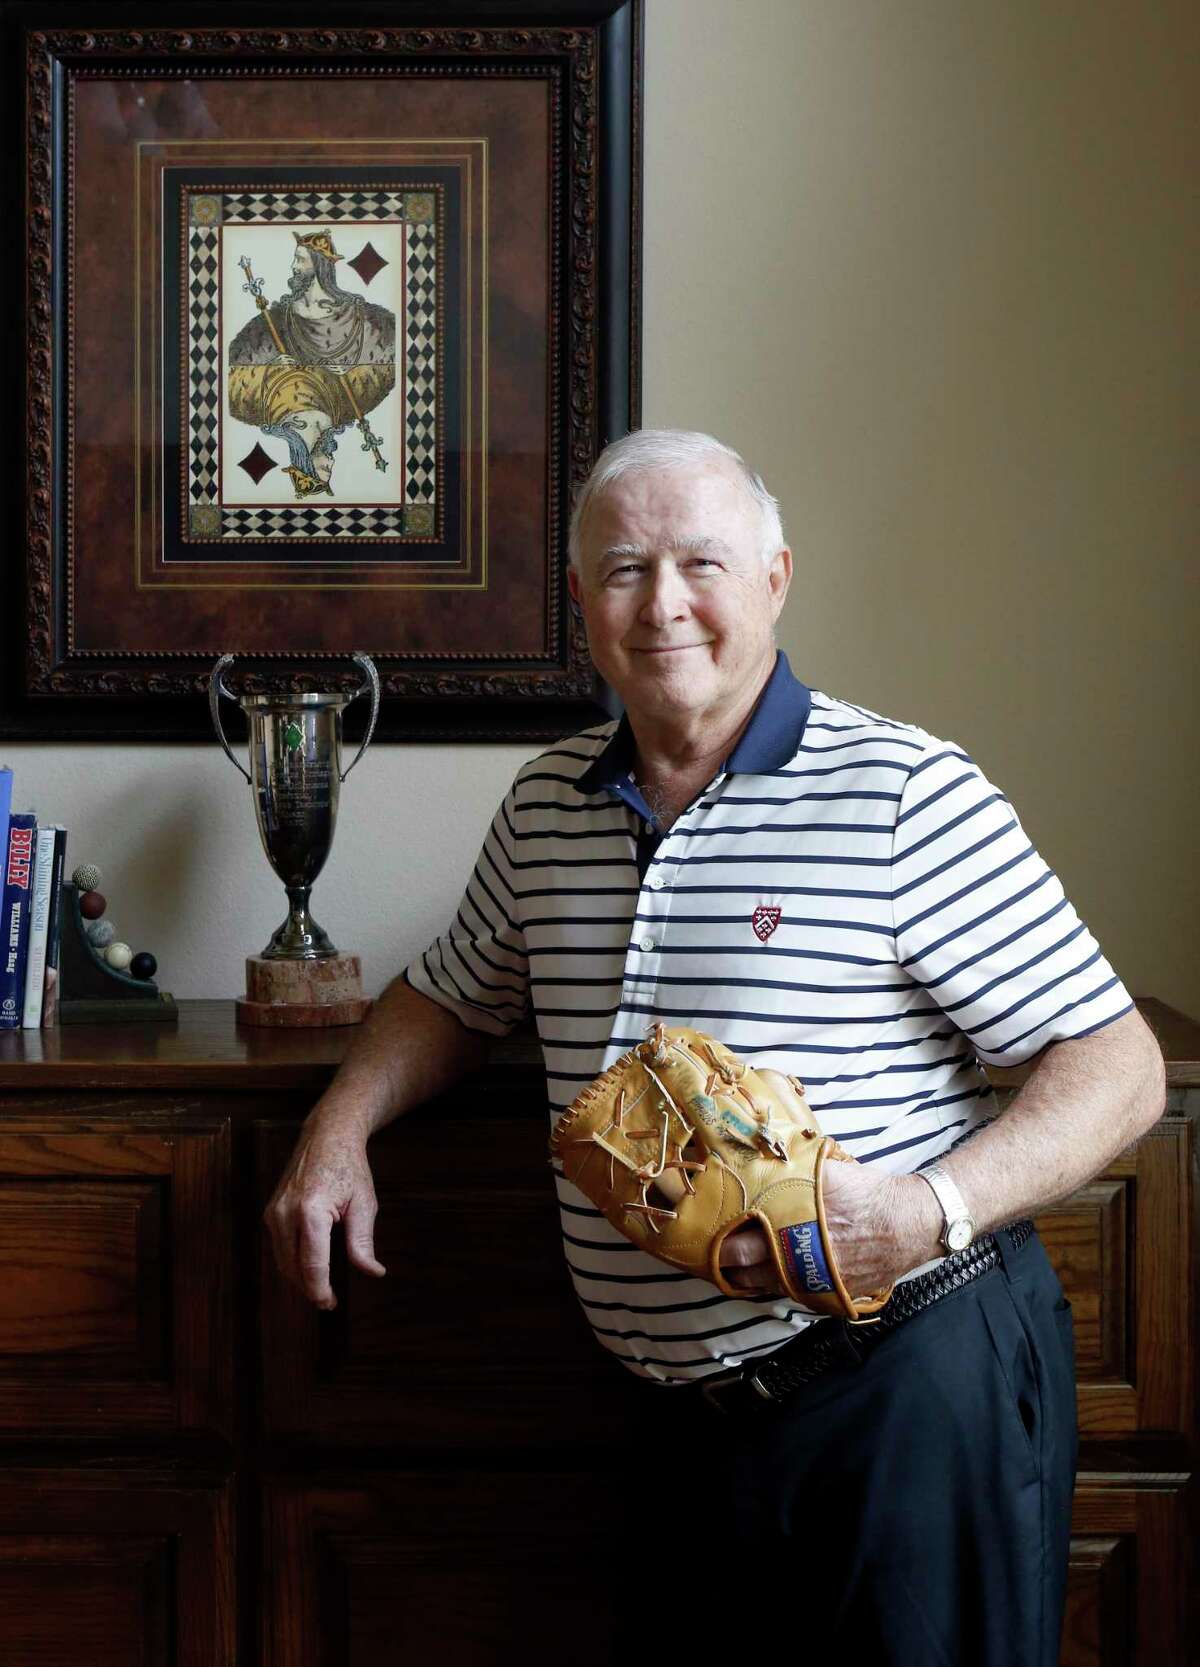 Former Major League Baseball player Billy Grabarkewitz, with a baseball glove he played with and a trophy for "the player that most exemplifies Dodgers tradition," at his home in Colleyville, Texas on Friday, June 14, 2019. Grabarkewitz looks back at the 1970 All-Star Game, which amazingly included three players from San Antonio. (photo by Lara Solt )